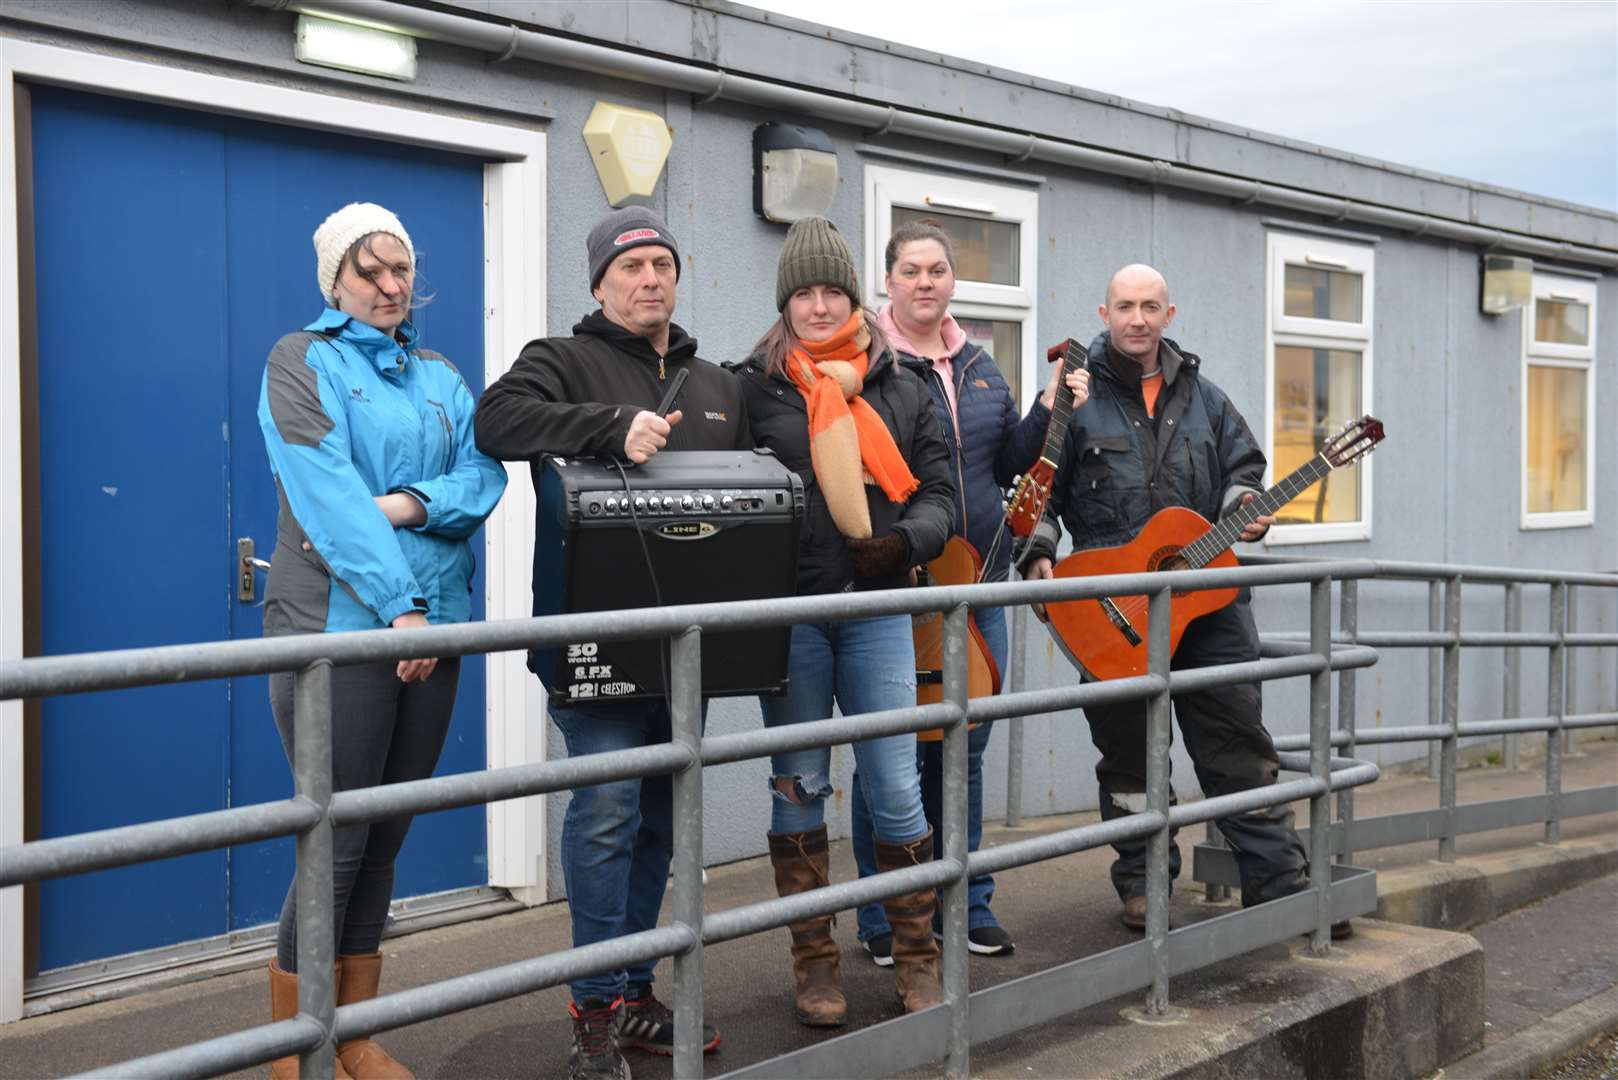 Parents (from left) Stephanie Rice, Gary Munro, Joanna Mackenzie, Carly Simpson and Andy Maclean at the music hut with some of the damaged equipment. Amplifiers were ruined by damp, ukeleles had to emptied of water, metal strings wee rusted and guitars were distorted by damp.